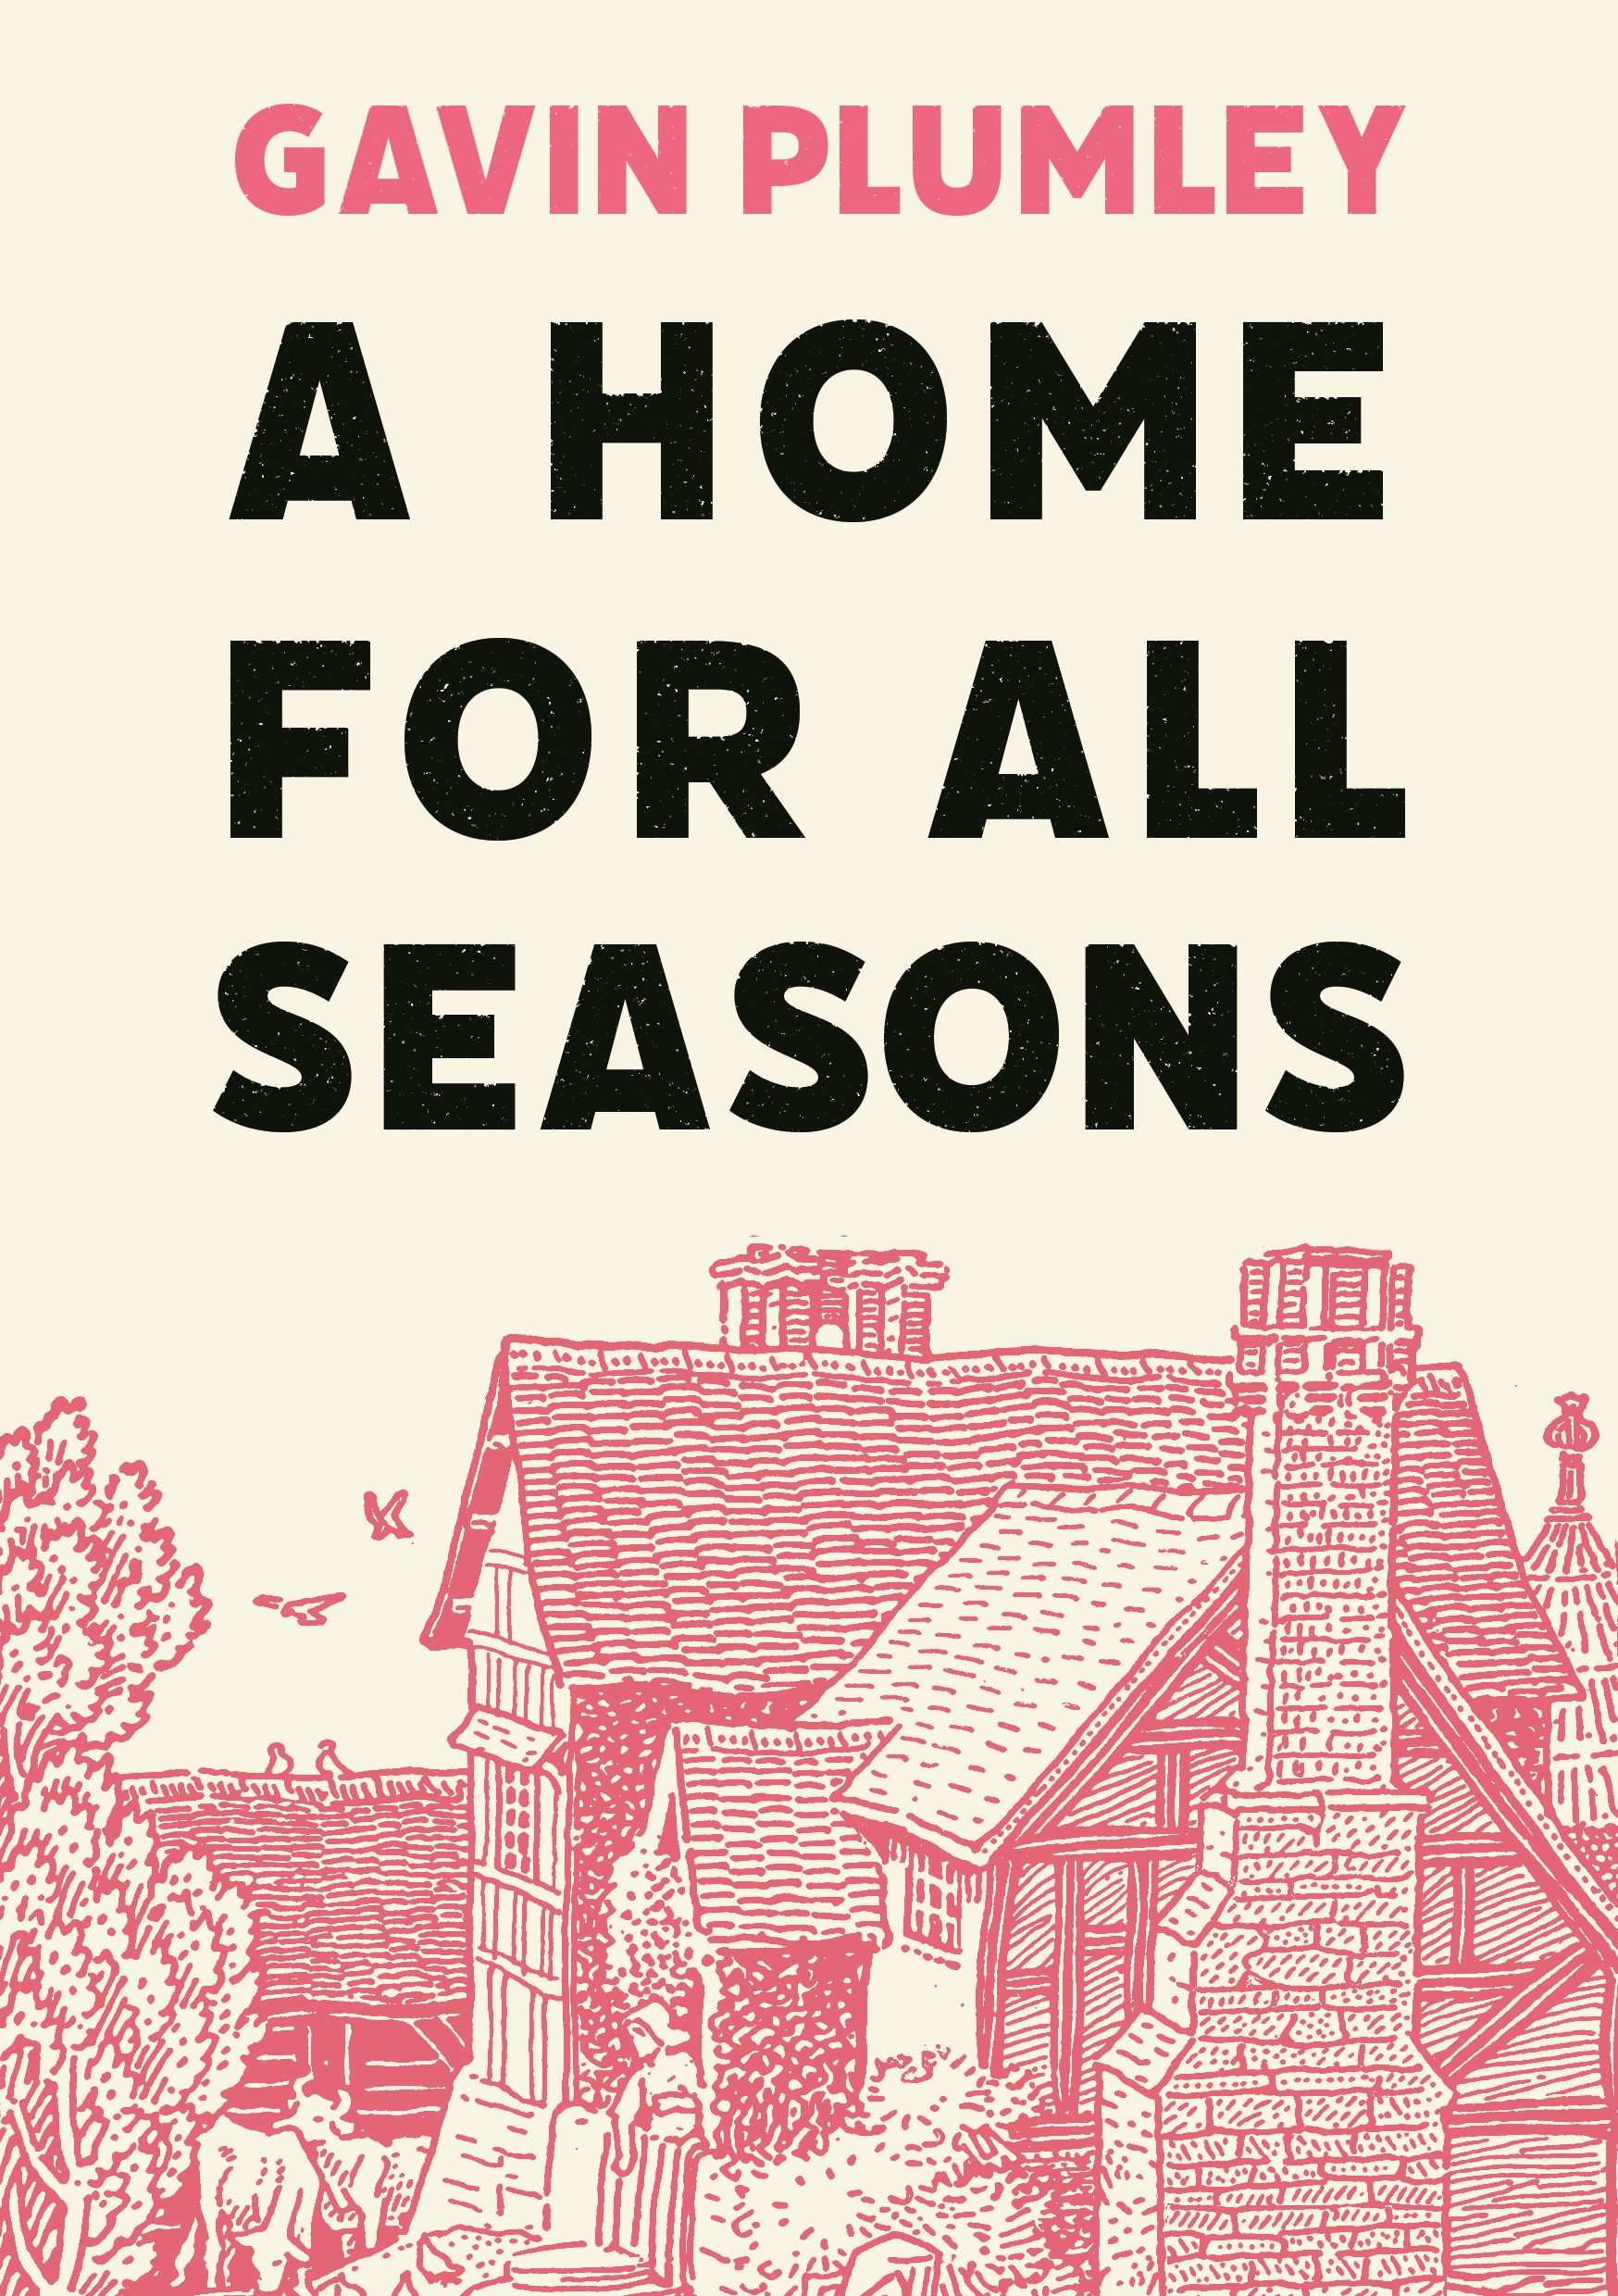 A Home For All Seasons by Gavin Plumley